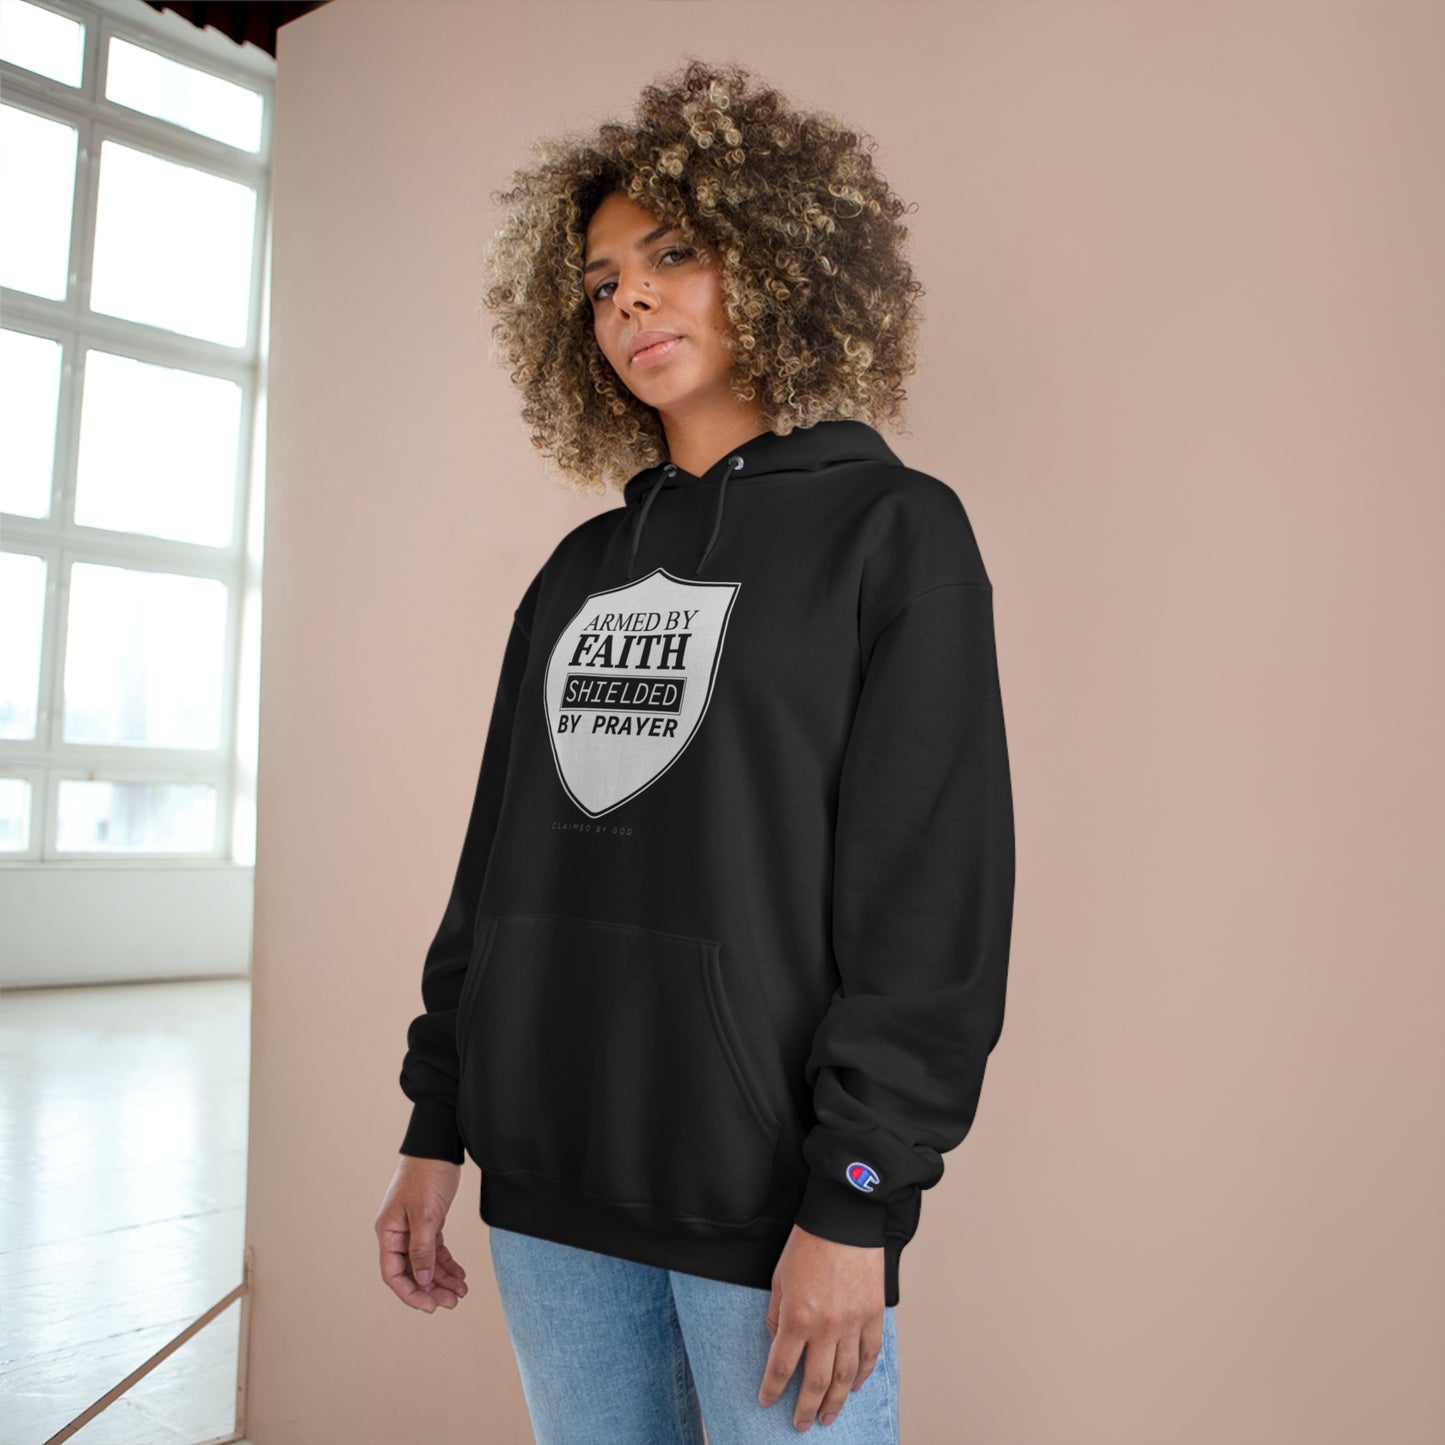 Armed By Faith Shielded By Prayer Unisex Champion Hoodie